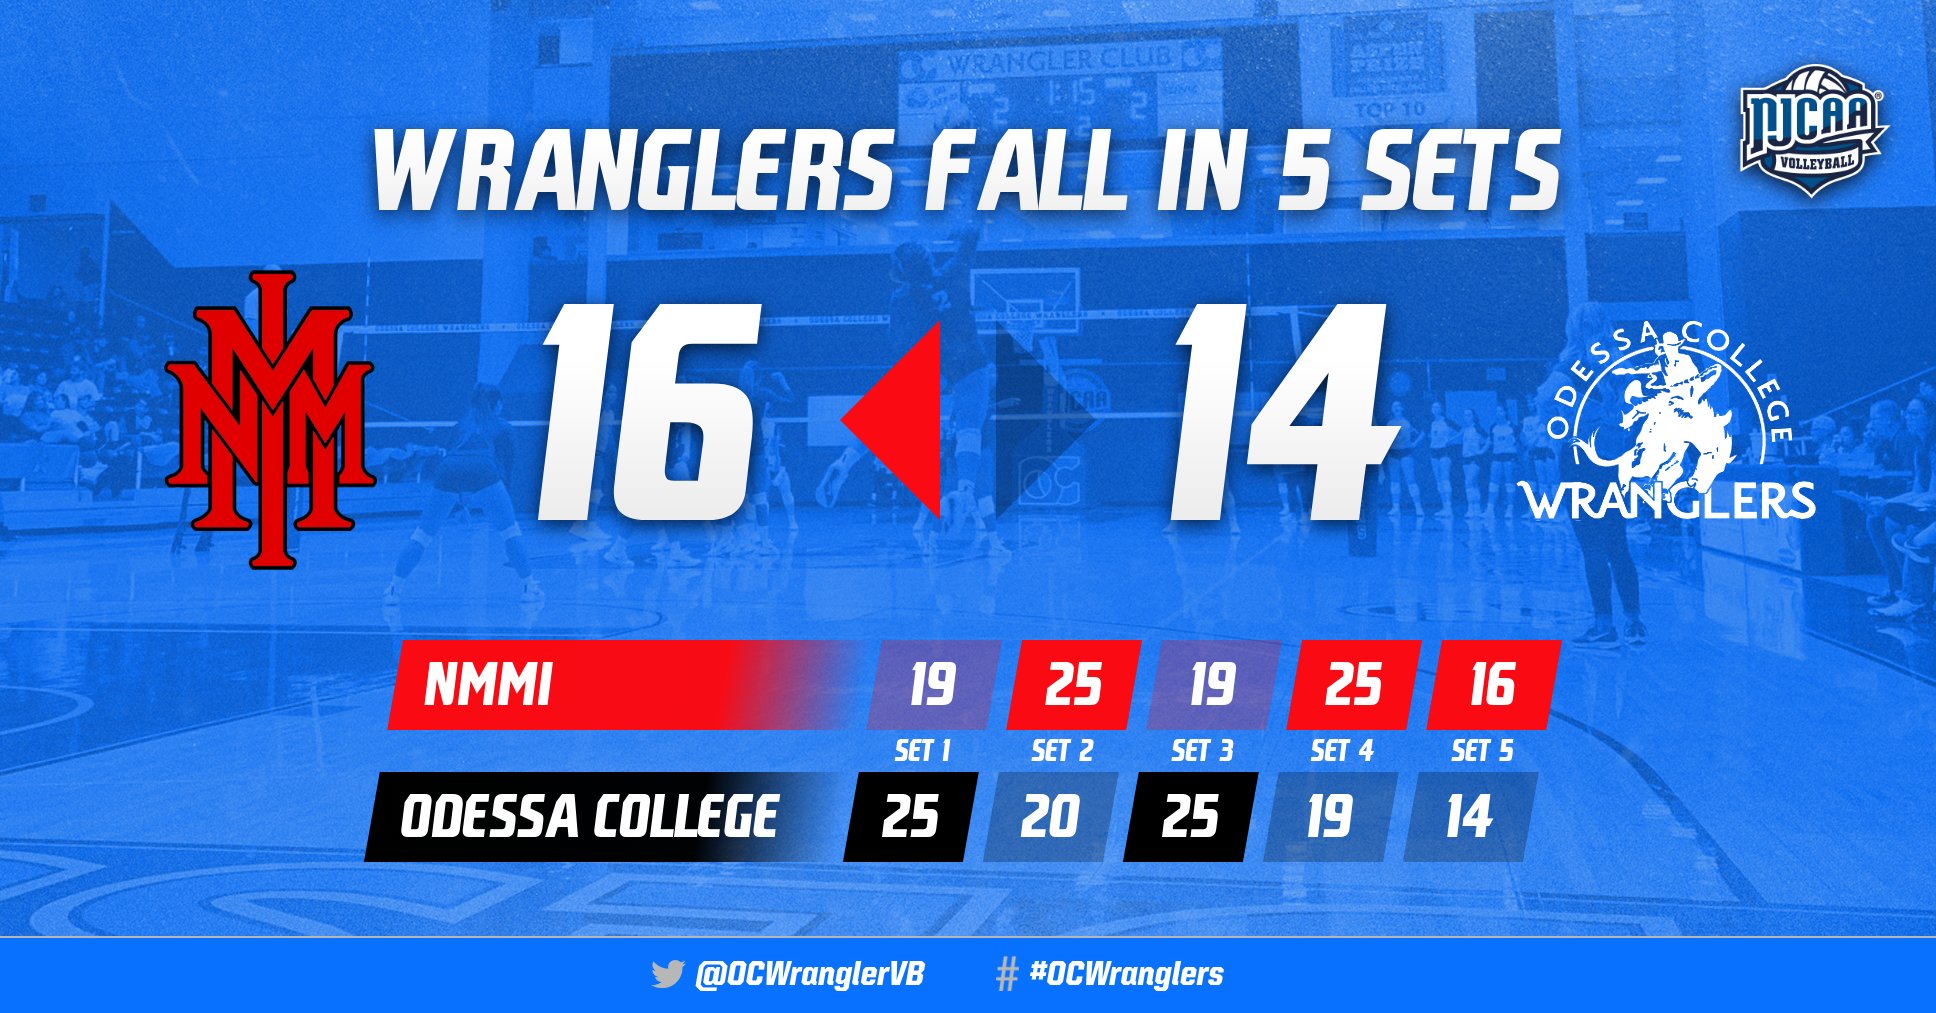 Wranglers fall to NMMI in 5 set Thriller